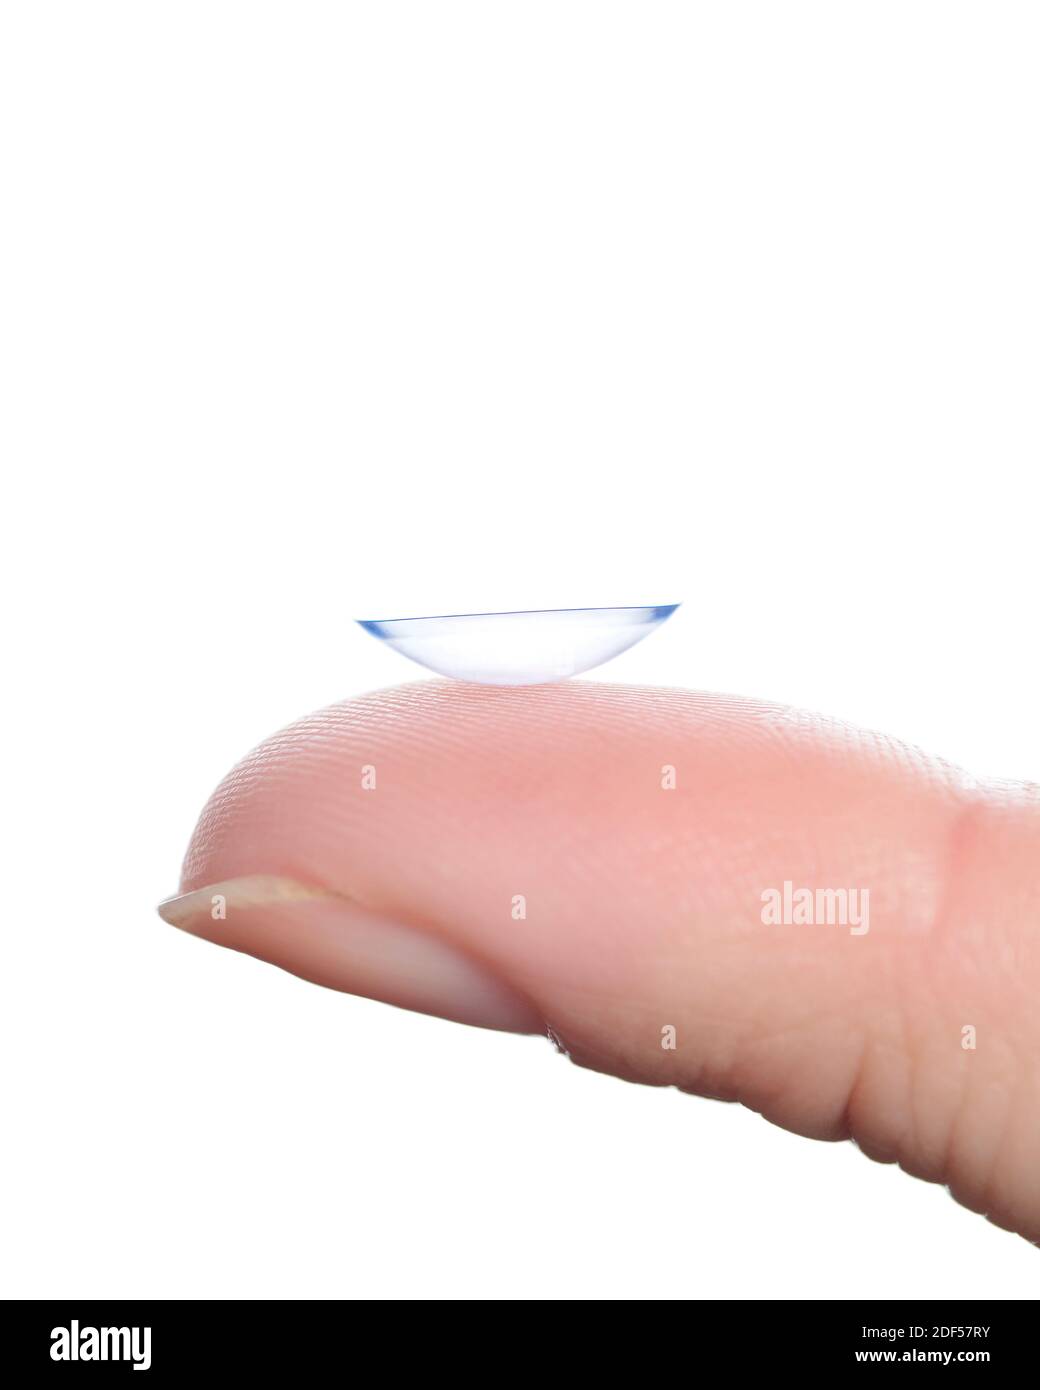 Contact Lens on a Finger Stock Photo